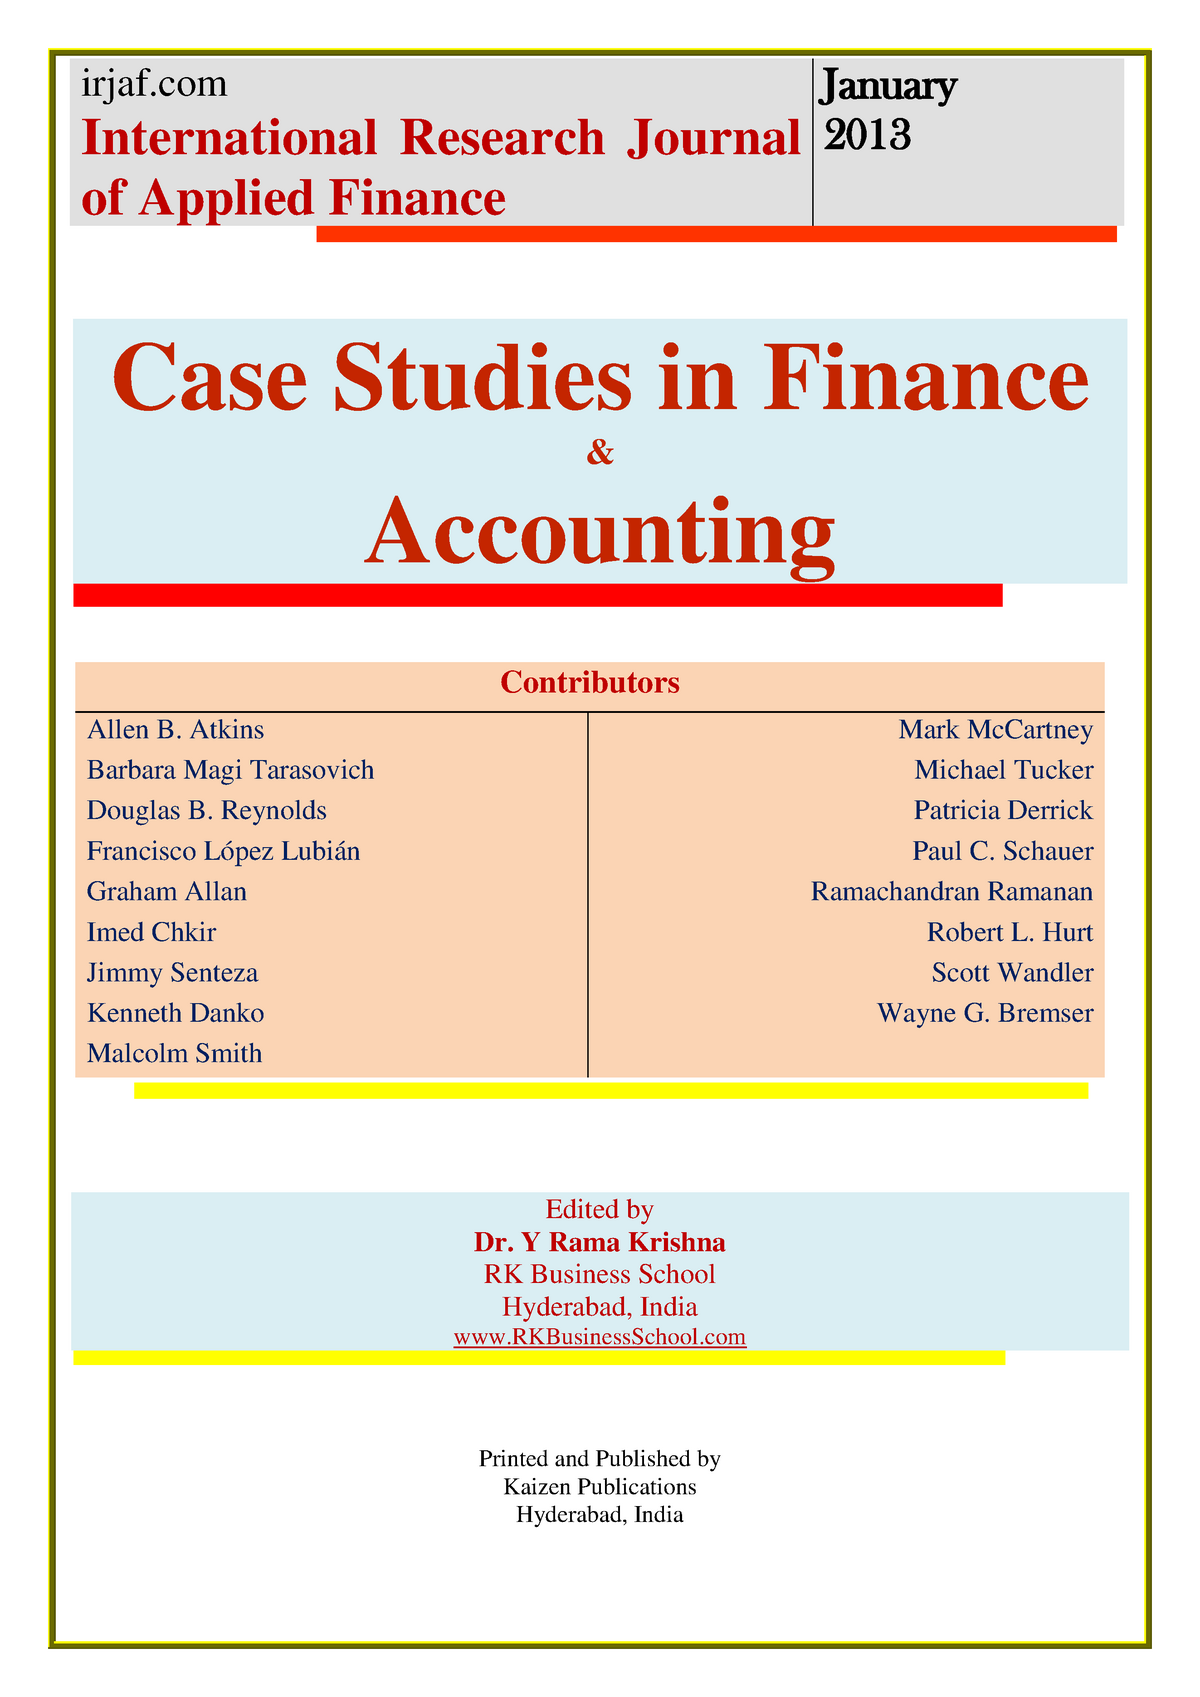 case study on accounting information system